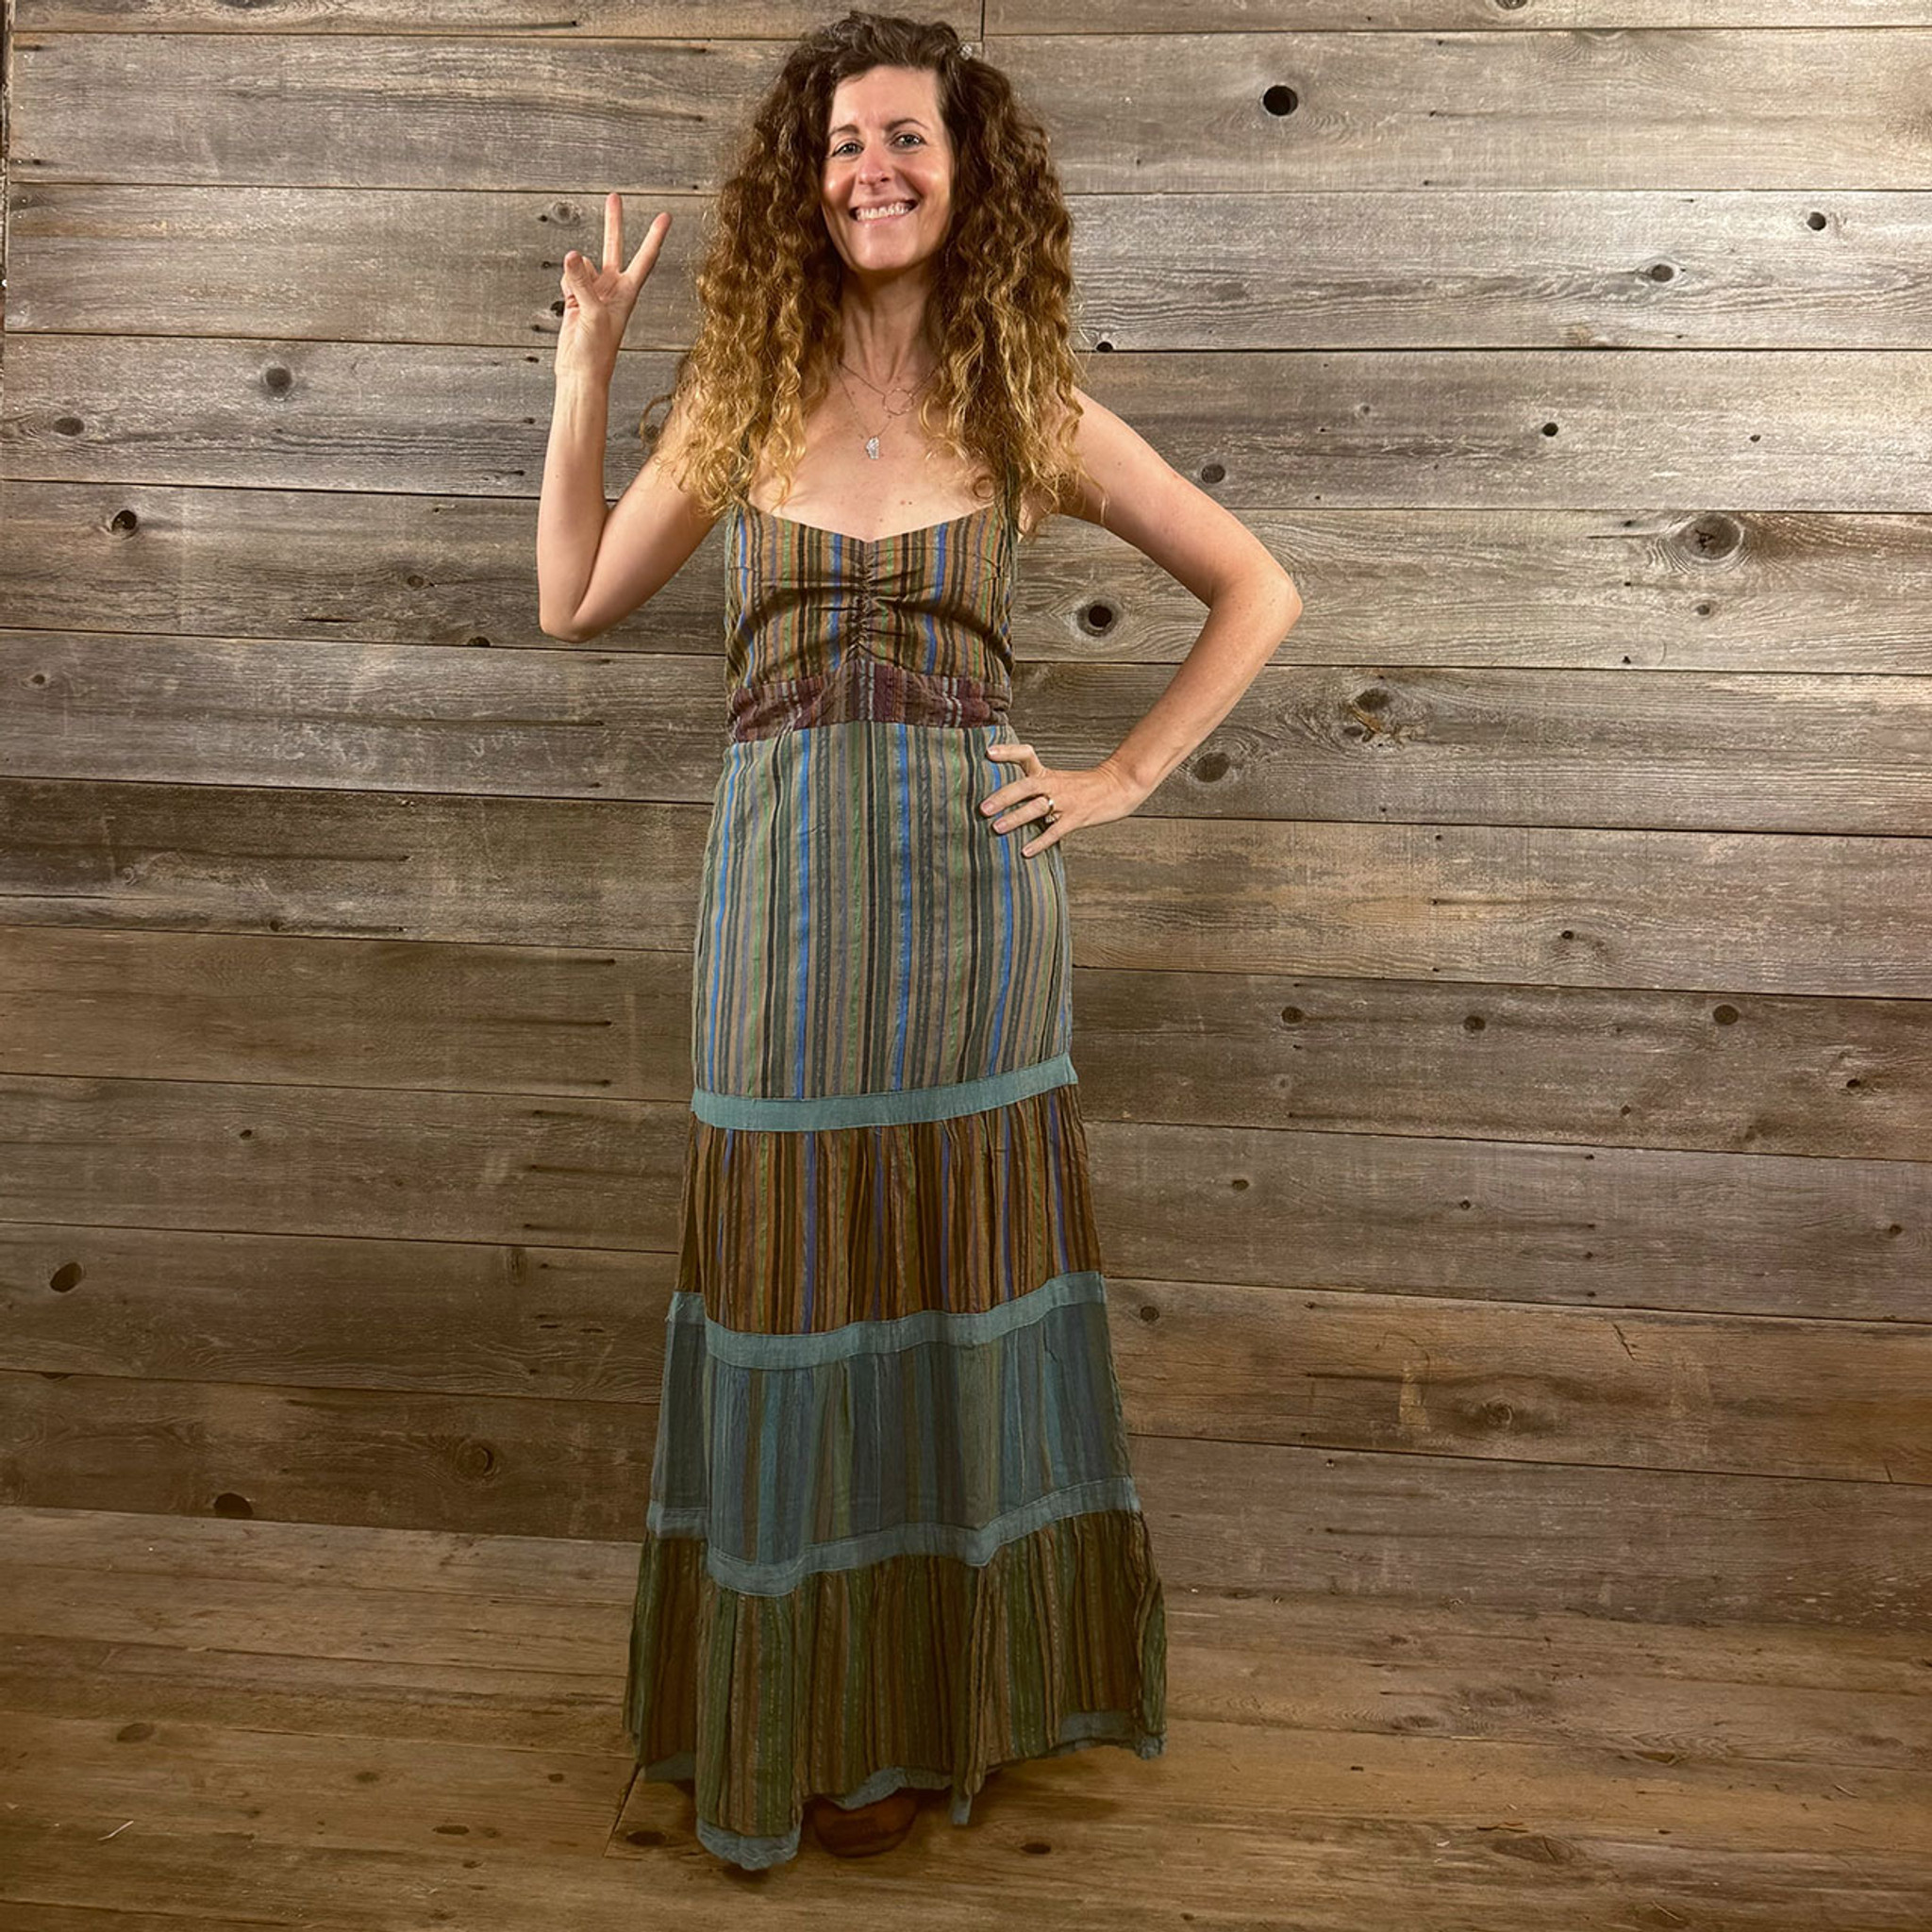 EVERMORE MAXI DRESS Stripe Tiered Maxi Dress w/ Lace Piping & Inside Pockets